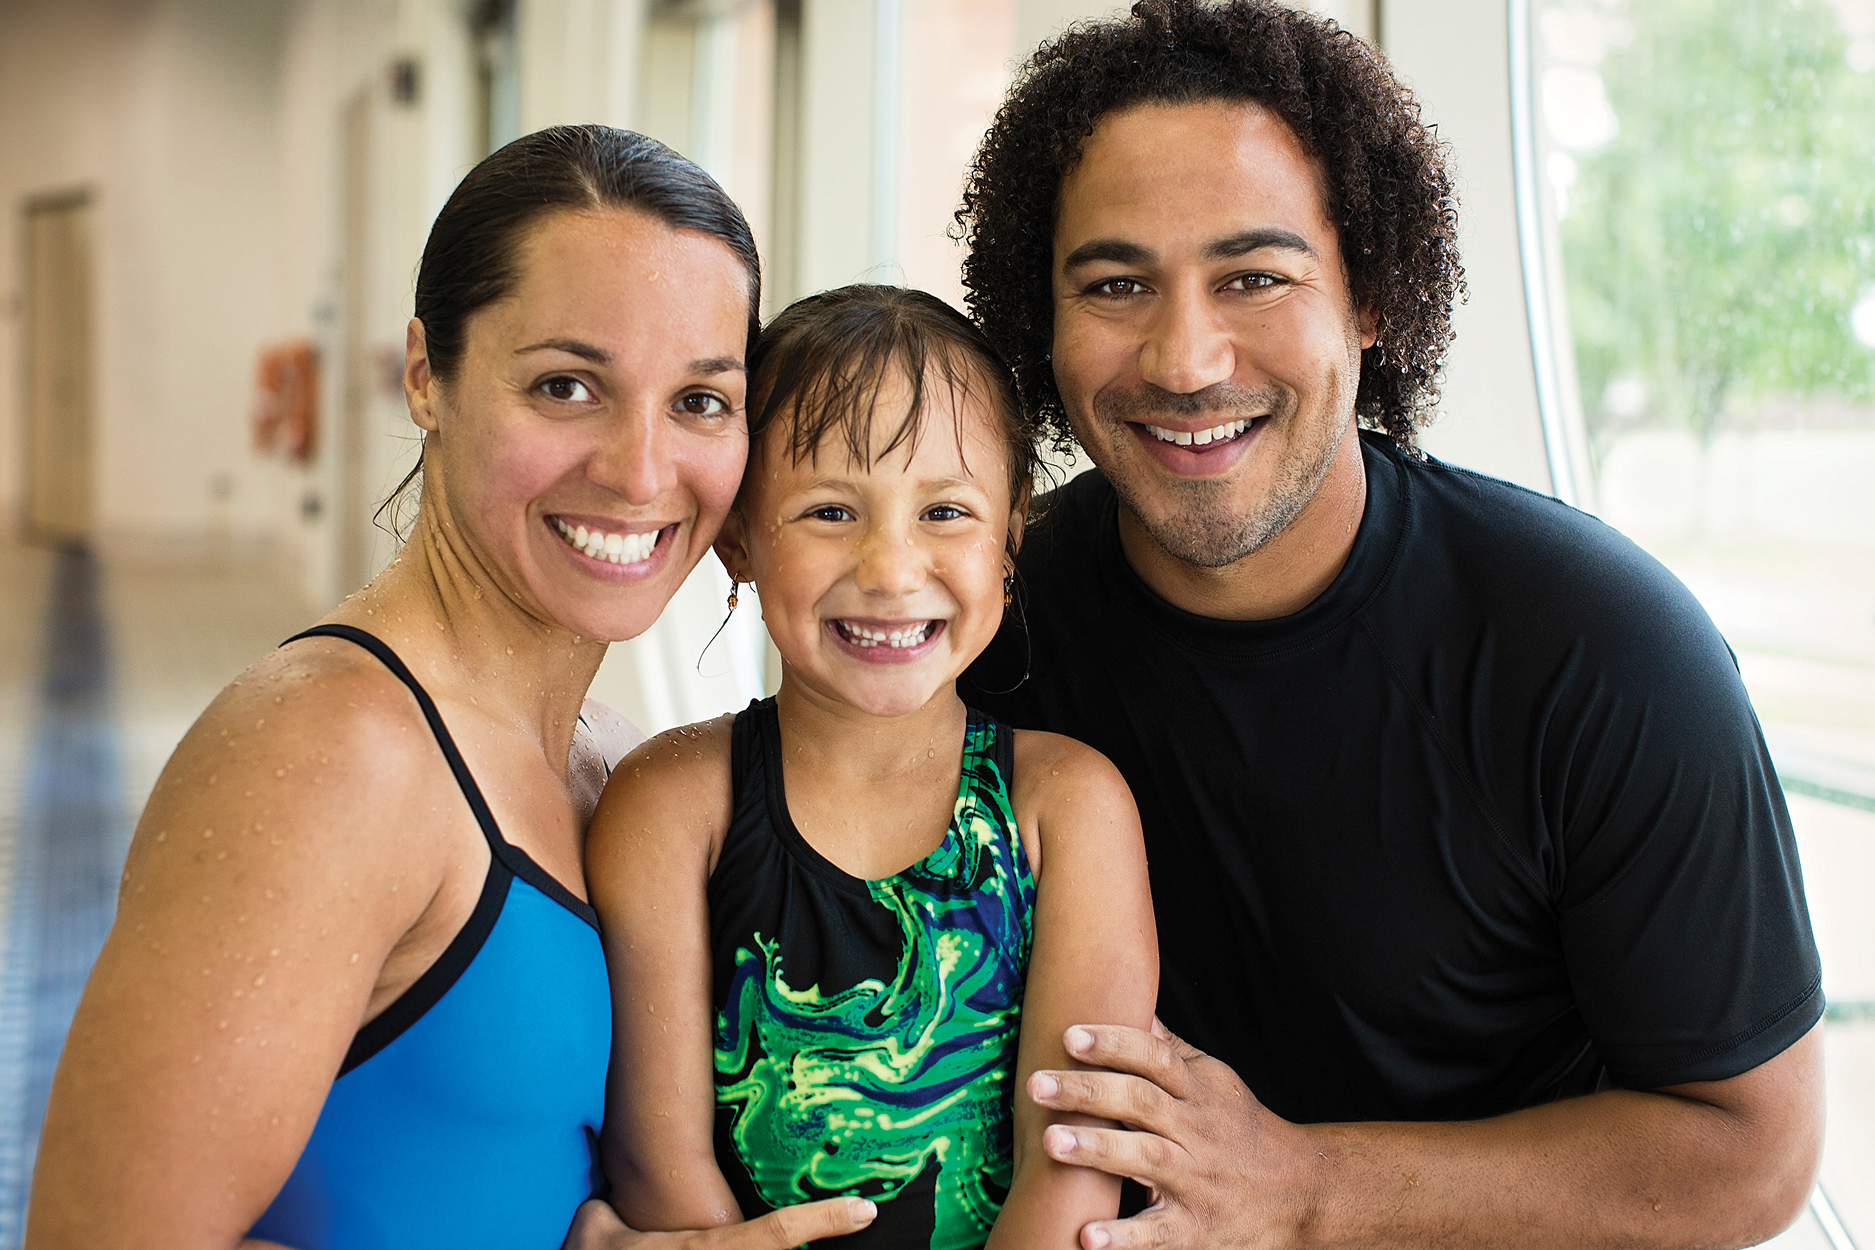 A mother and father smiling with their daughter next to an indoor pool